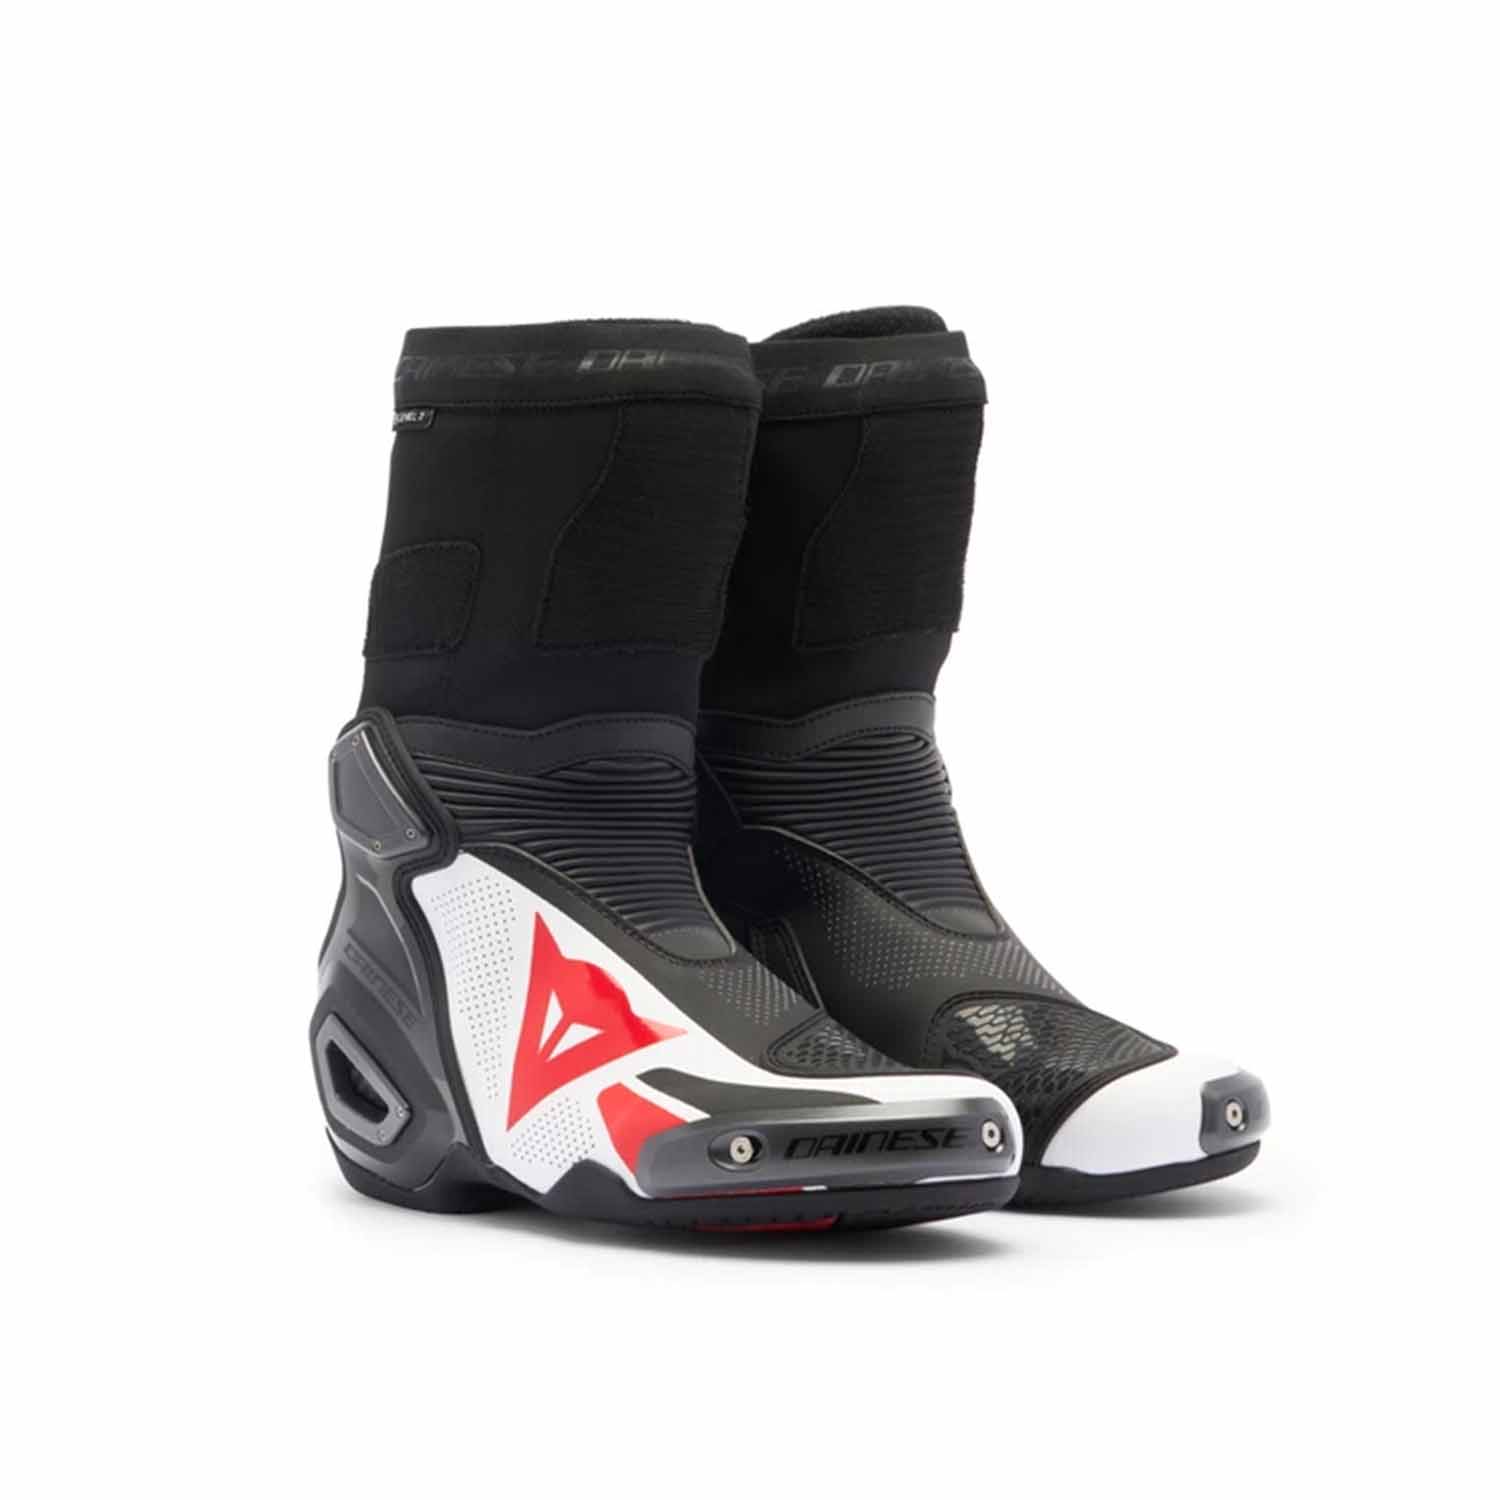 Image of Dainese Axial 2 Air Boots Black White Lava Red Size 42 ID 8051019739834